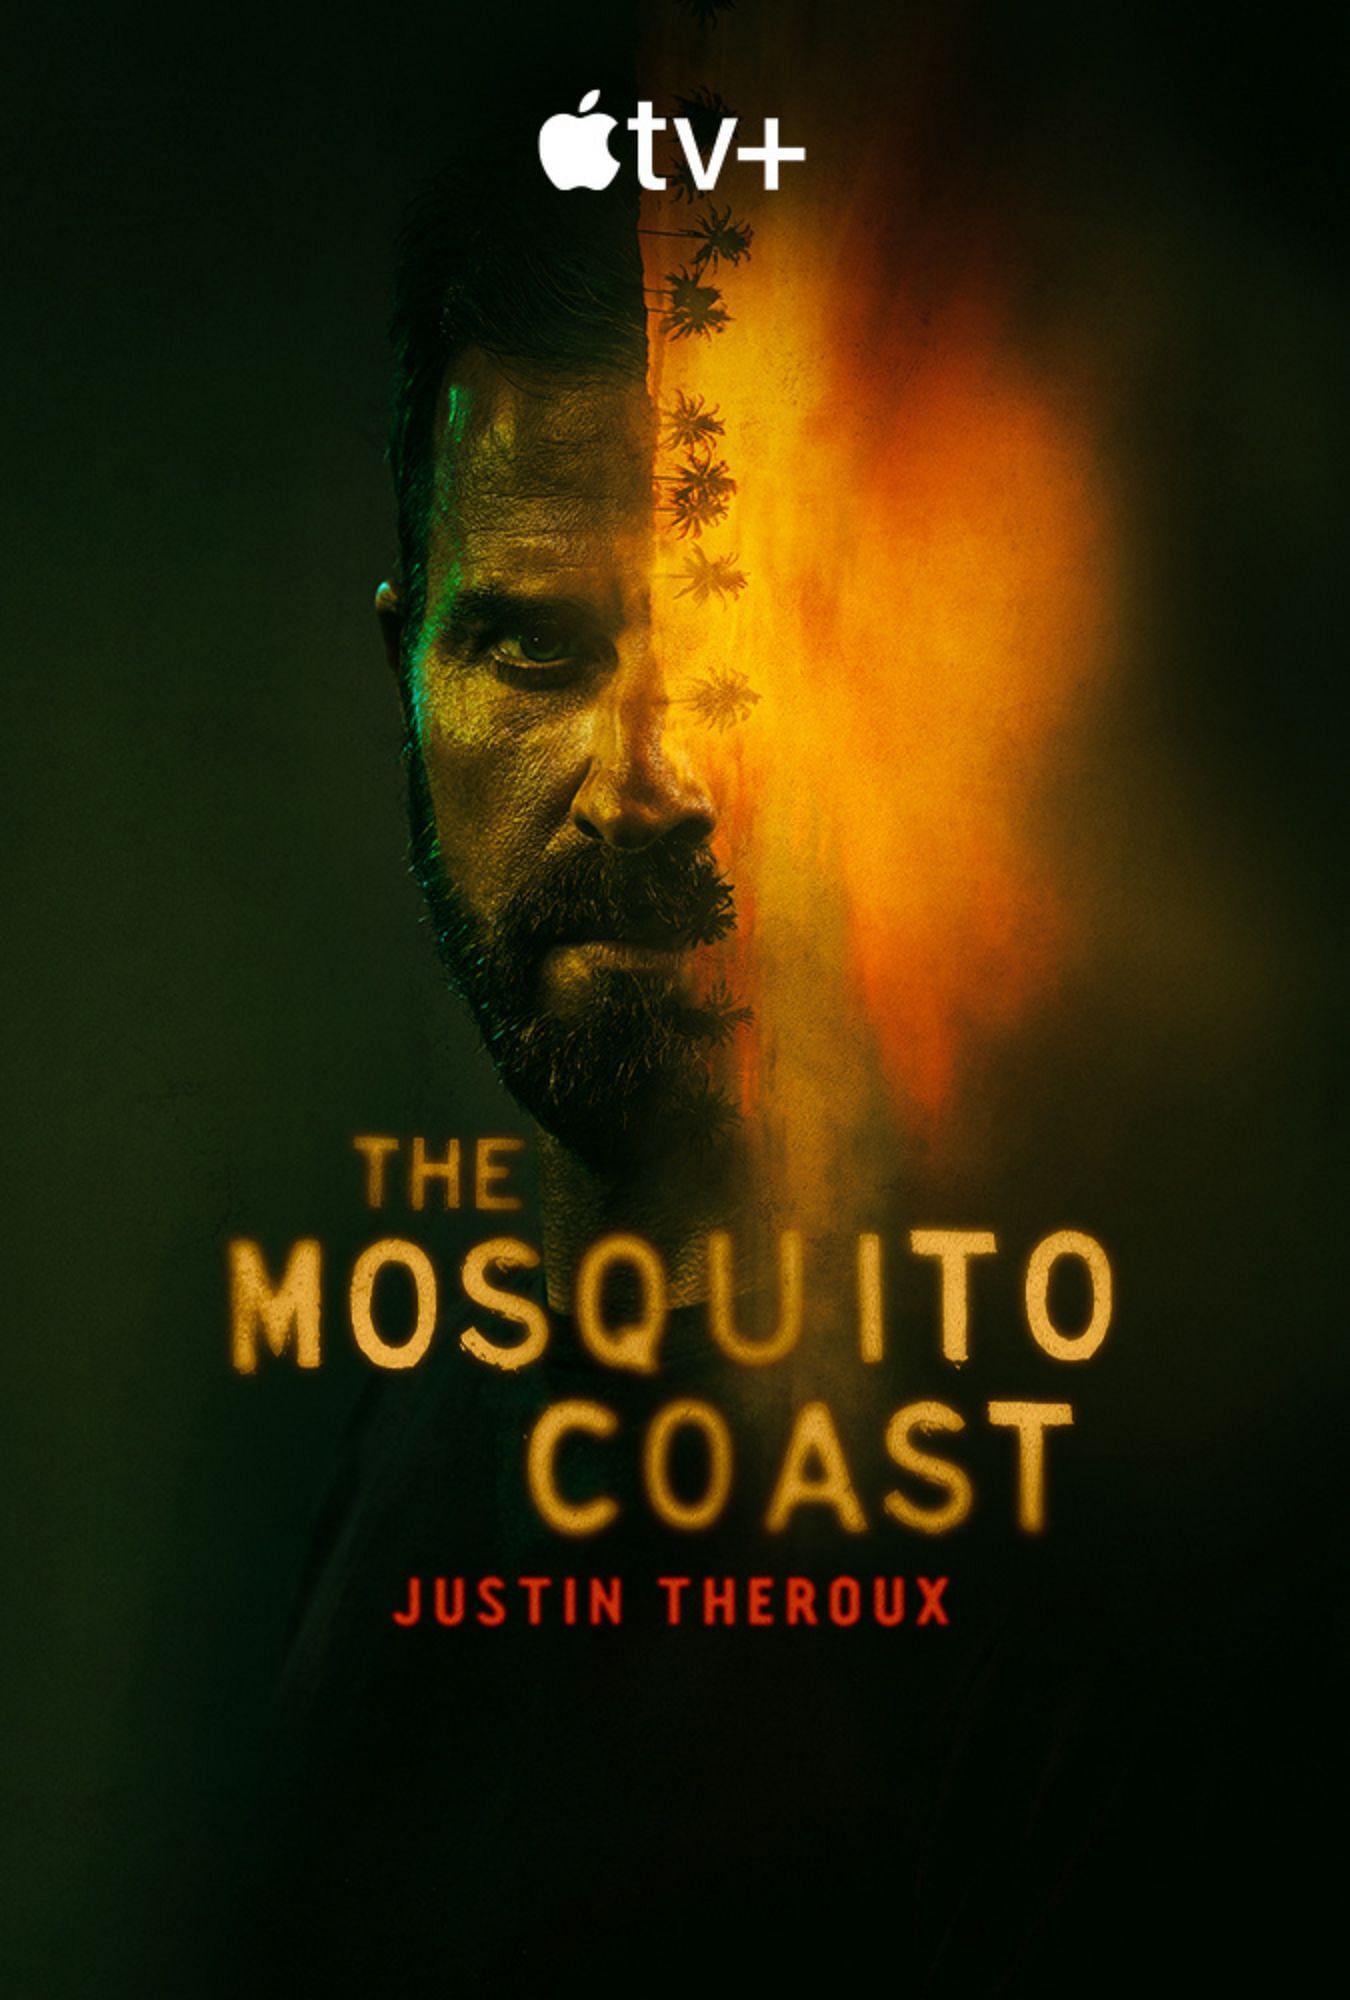 The Mosquito Coast official poster (Image via IMDB)